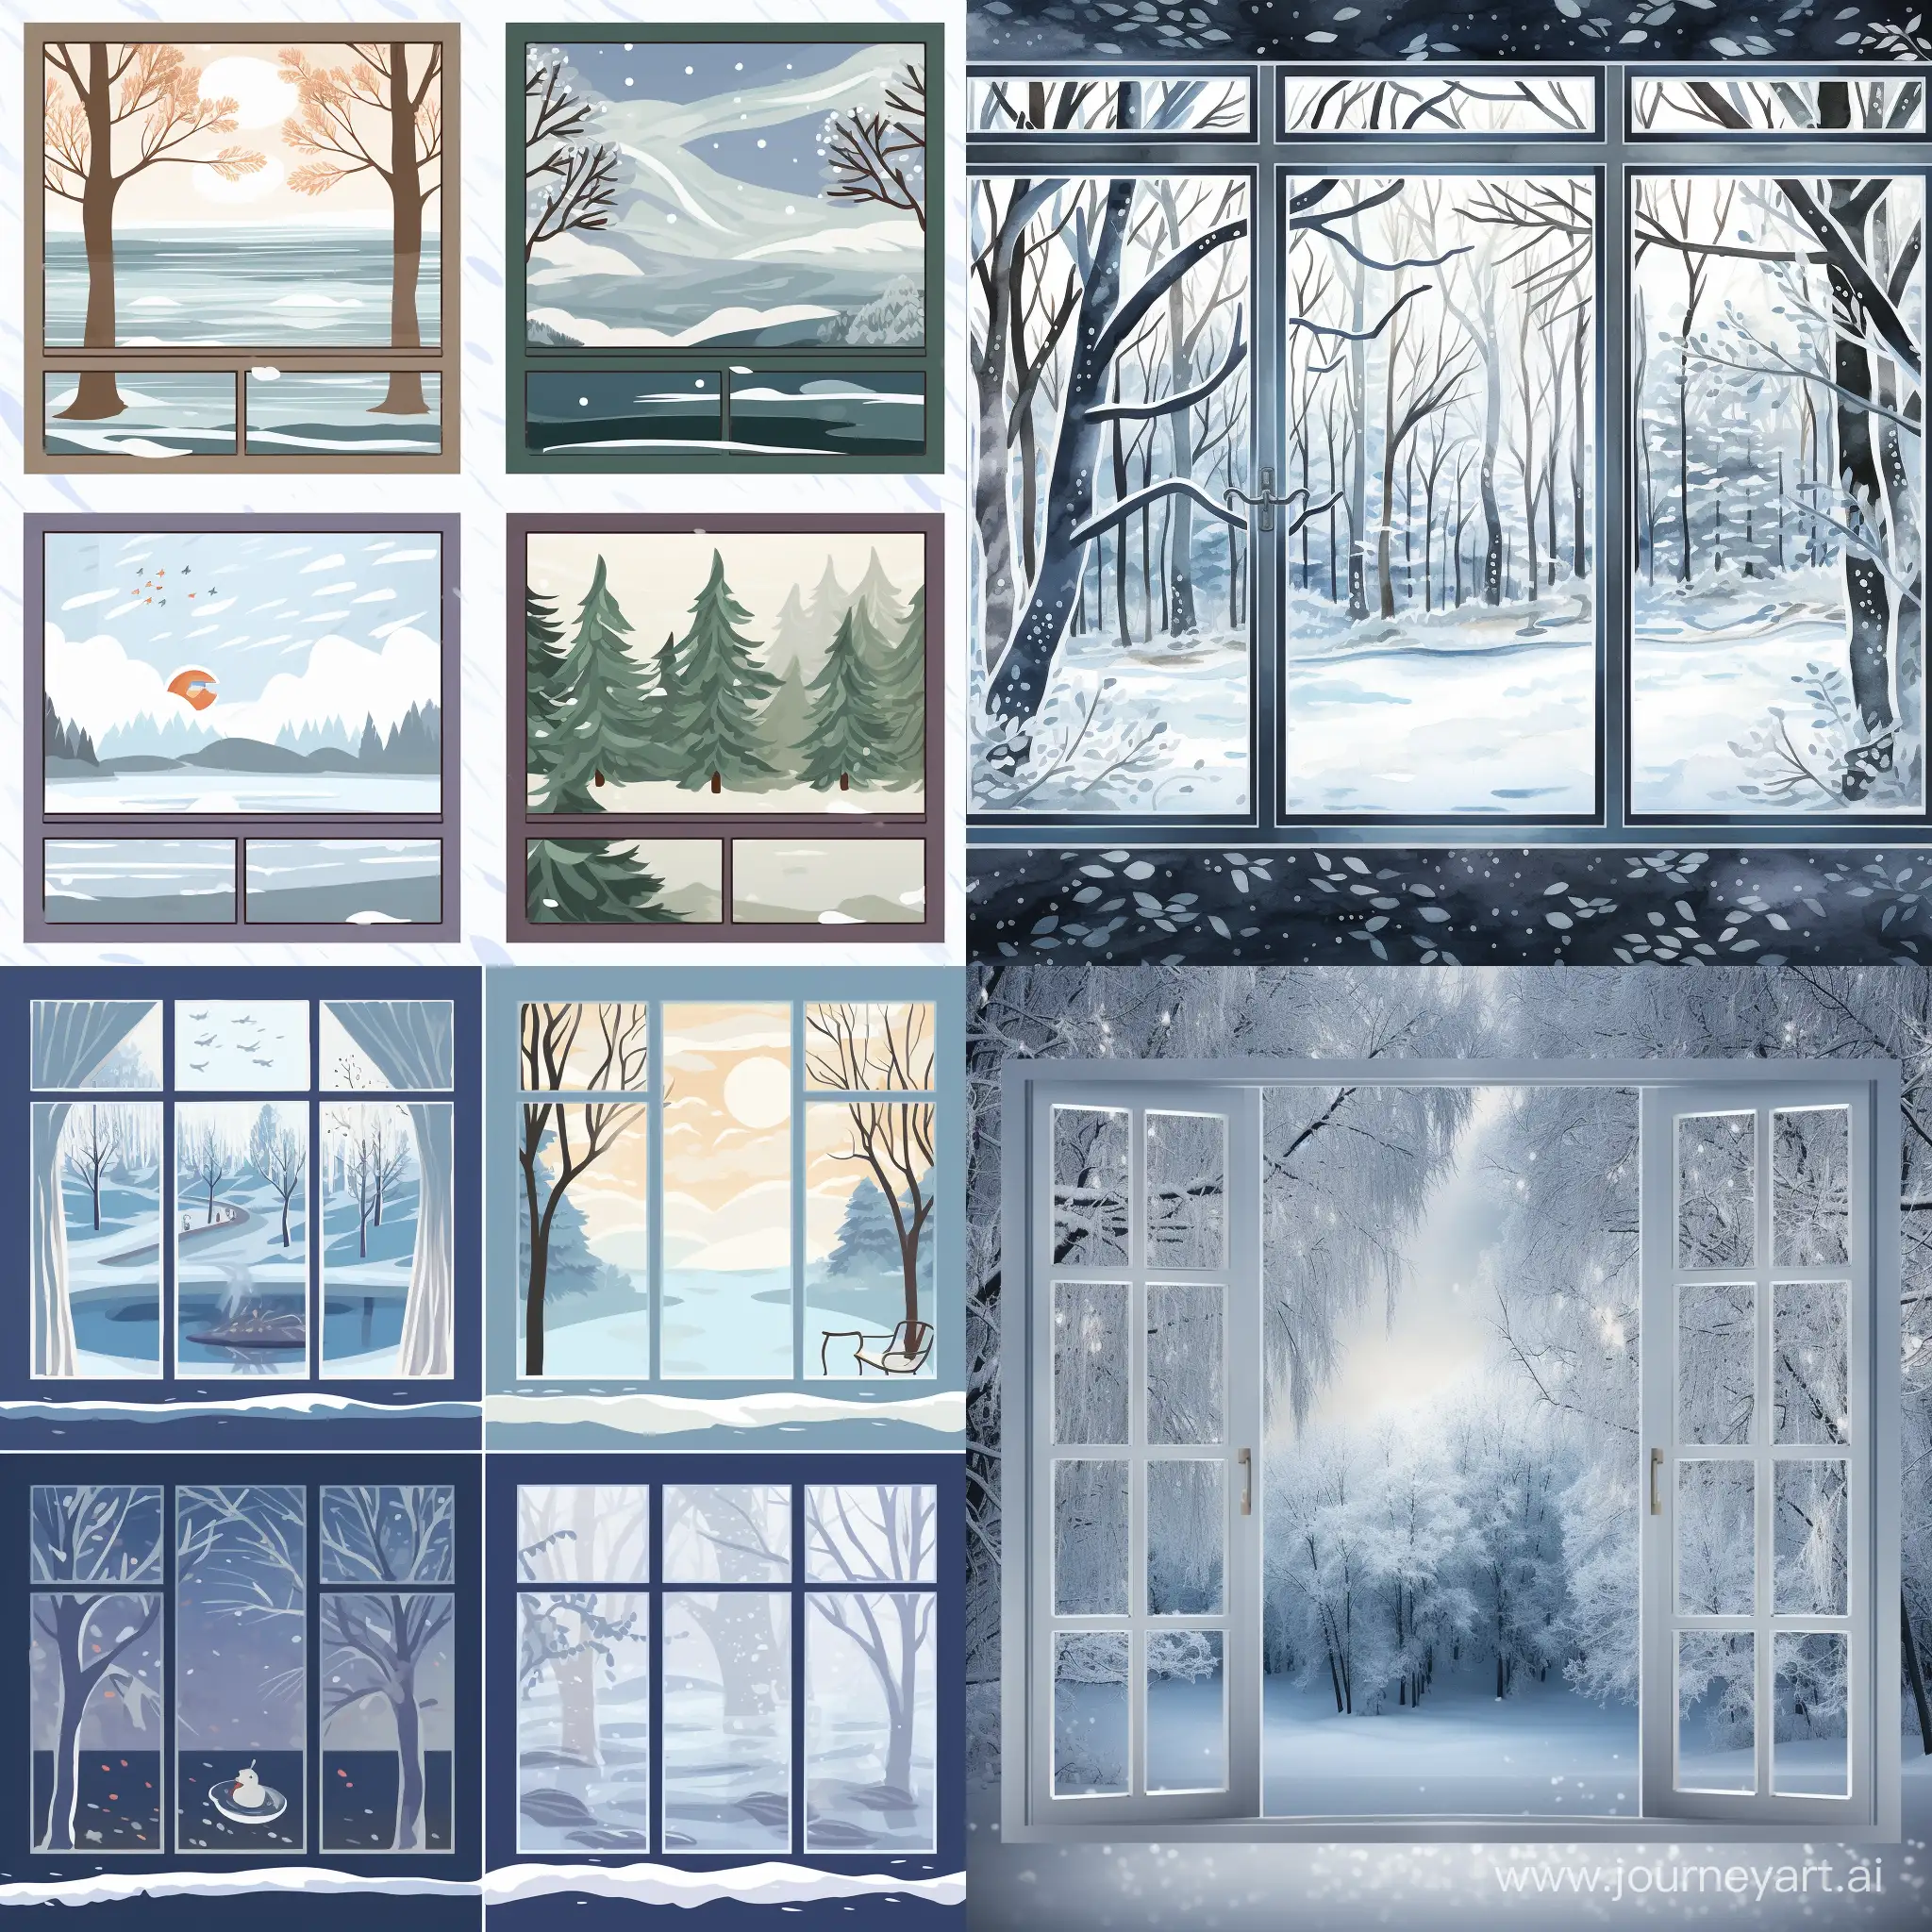 1. Describe the scene outside the window, with the lake covered in snow, creating a silver mirror reflecting the snowy landscape.  2. Depict the trees outside the window, each leaf embraced by snowflakes, forming beautiful snowy crowns on the branches.  3. Emphasize the snowy scene outside the window, with snowflakes gracefully dancing by the lakeside and forming a thin layer of white snow on the window.  4. Describe the distant mountain peaks, faintly visible in the snowstorm, outlining their majestic contours.  5. Highlight the small boat outside the window, covered in snow, appearing as if frozen on the cold surface of the lake.  6. Express the rising steam from the coffee cup, creating a warm atmosphere that permeates the entire second-floor space.  7. Paint a picture of you leaning against the second-floor window, feeling the cool touch of the window, your body gently resting against the warm glass.  8. Describe the interior of the window, including the decorations and furniture on the second floor, creating a tranquil and comfortable viewing space.  9. Emphasize the sense of time standing still, making the reader feel as if this moment is frozen, with only the snowscape and the aroma of coffee slowly flowing.  10. Guide the reader to pay attention to the details of the snowy lakeside scene, such as the swirling snowflakes and the snow accumulation on tree branches, making the imagery more vivid.